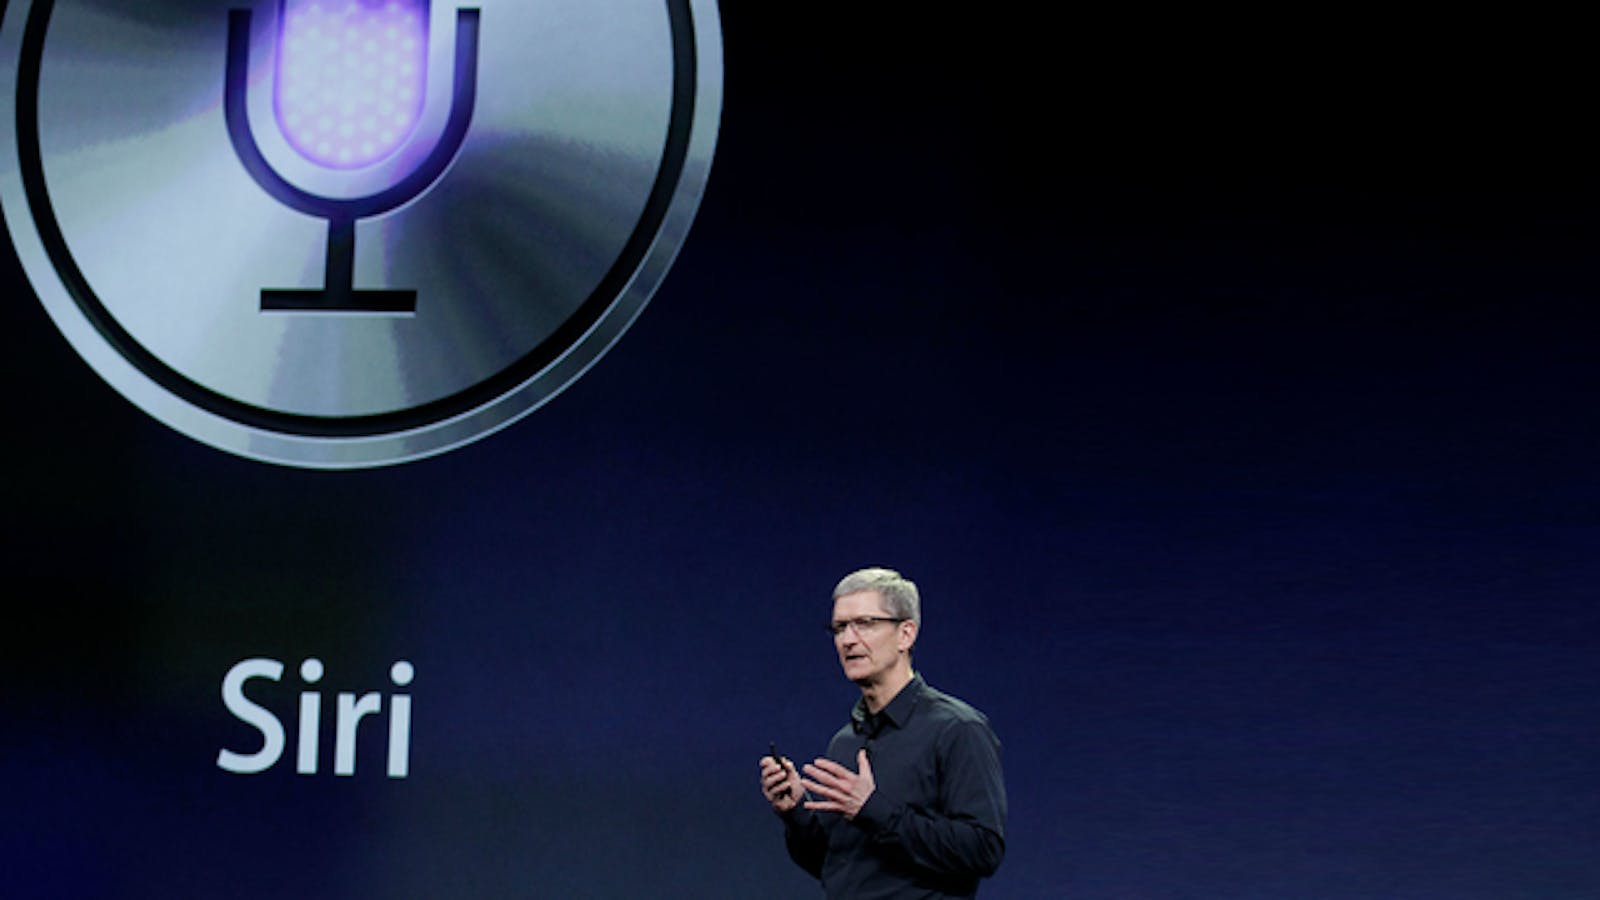 Apple CEO Tim Cook at an event in 2012. Photo by AP.